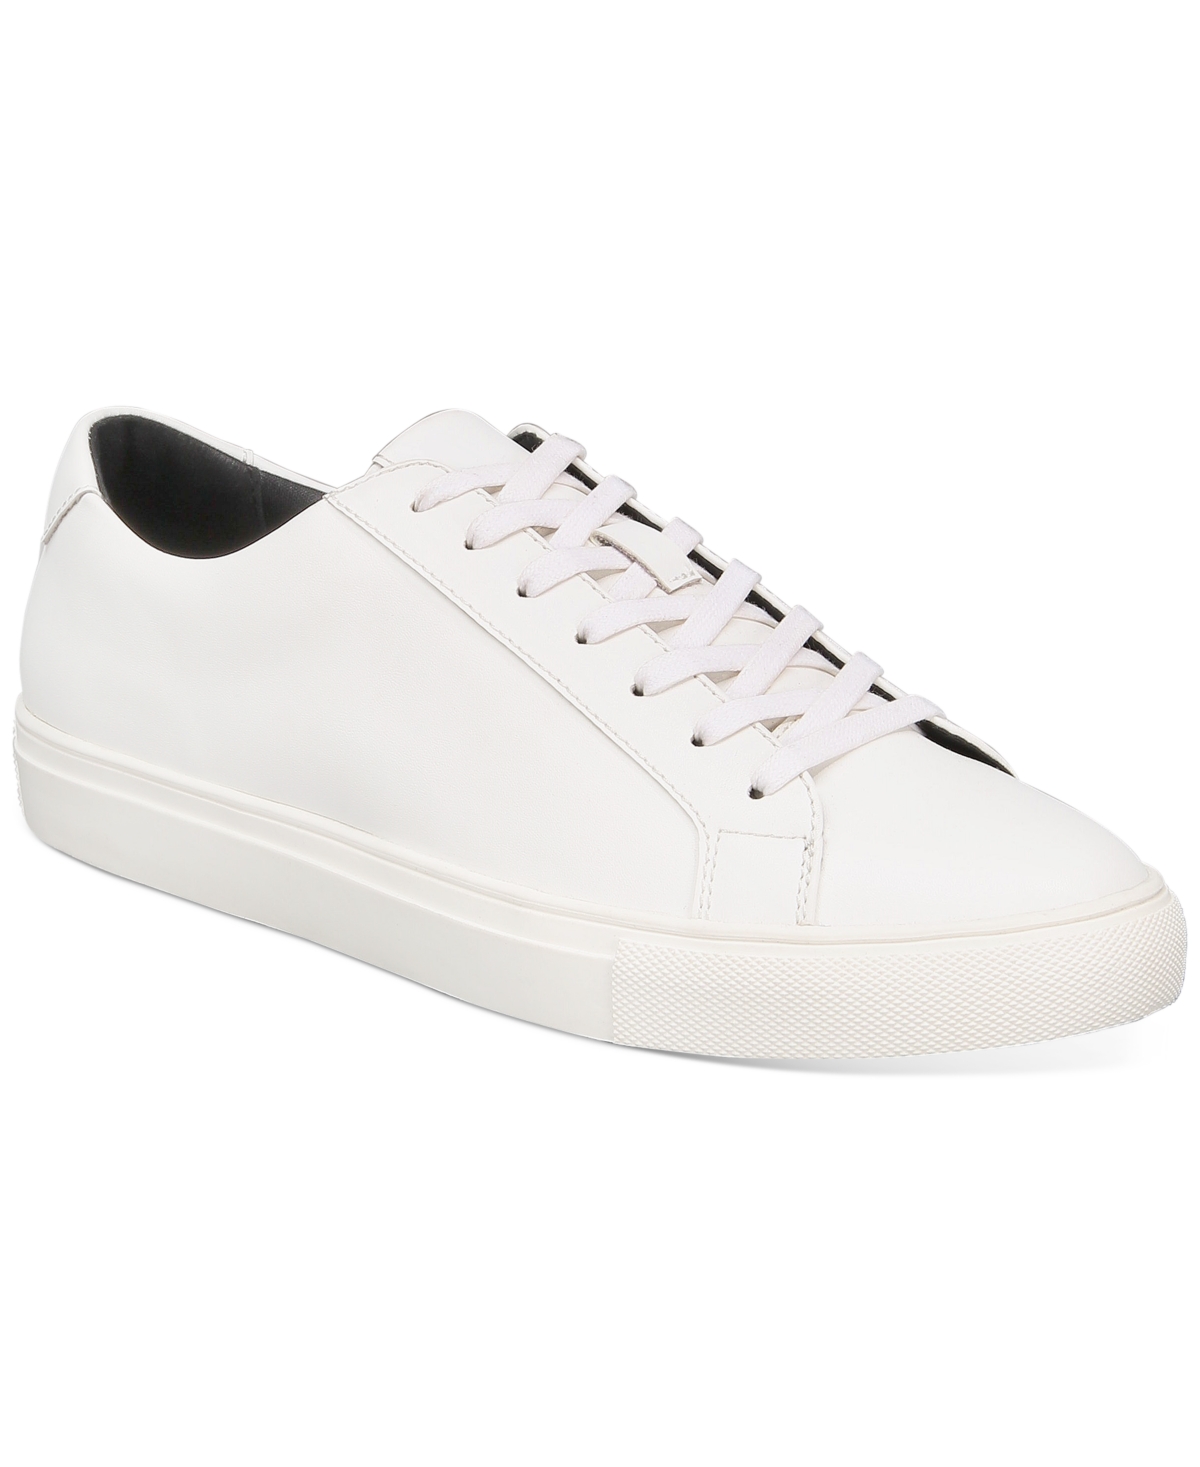 Men's Grayson Lace-Up Sneakers, Created for Macy's - Tan w/ White